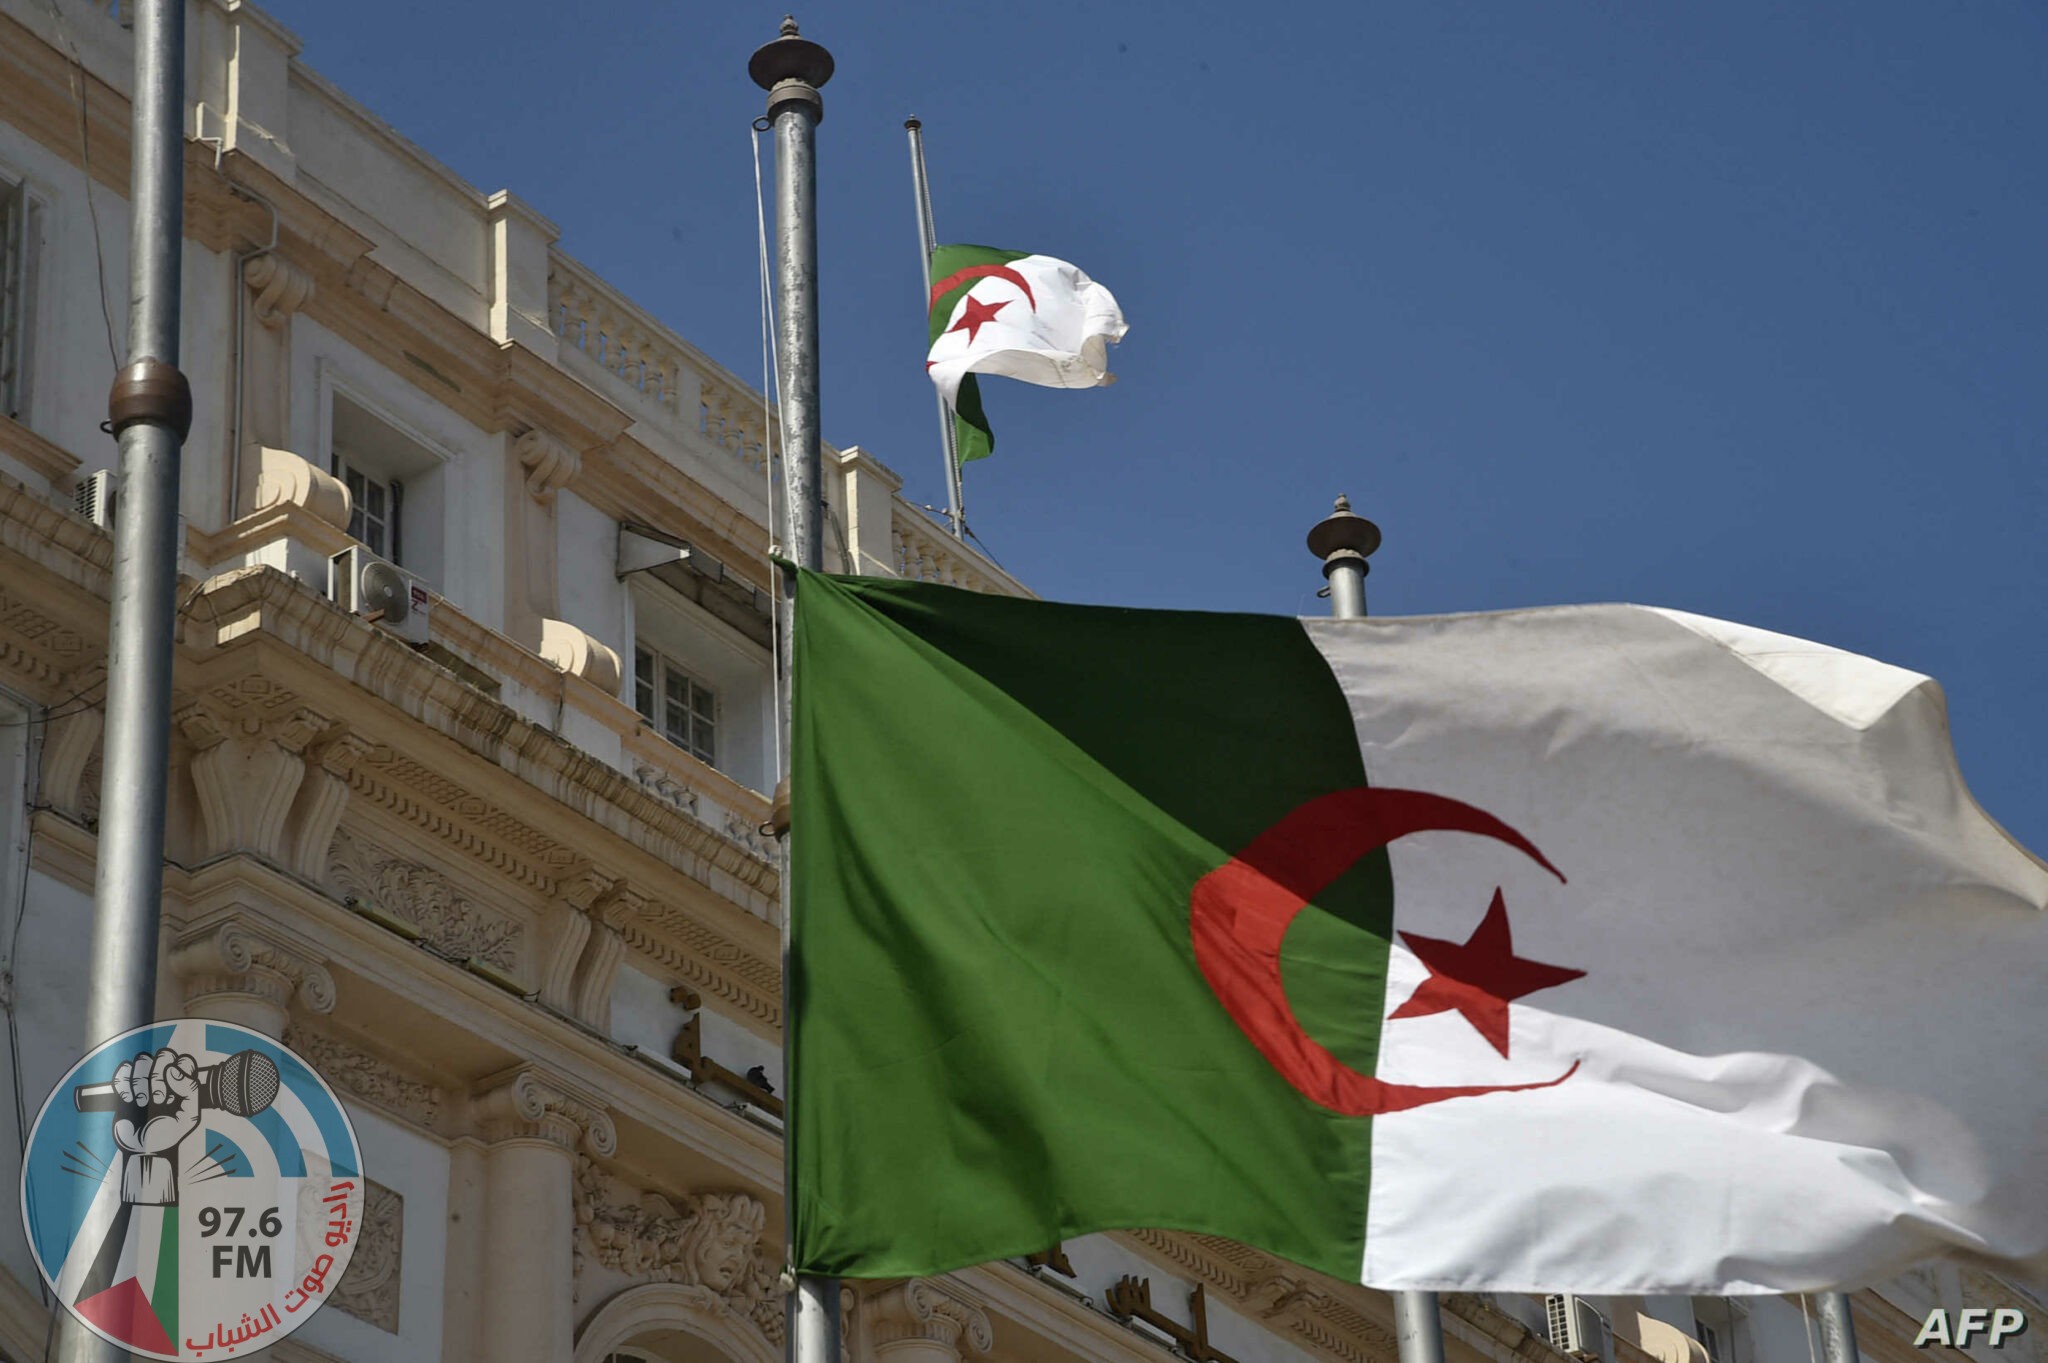 The Algerian national flag flies at half mast in the capital Algiers on September 18, 2021, following the death of former president Abdelaziz Bouteflika. - Bouteflika, who ruled Algeria for two decades before resigning in 2019 as huge protests engulfed the country, has died aged 84, public television announced. The former strongman had left office in April 2019 under pressure from the military, following weeks of demonstrations over his bid to run for a fifth term in office. (Photo by RYAD KRAMDI / AFP)